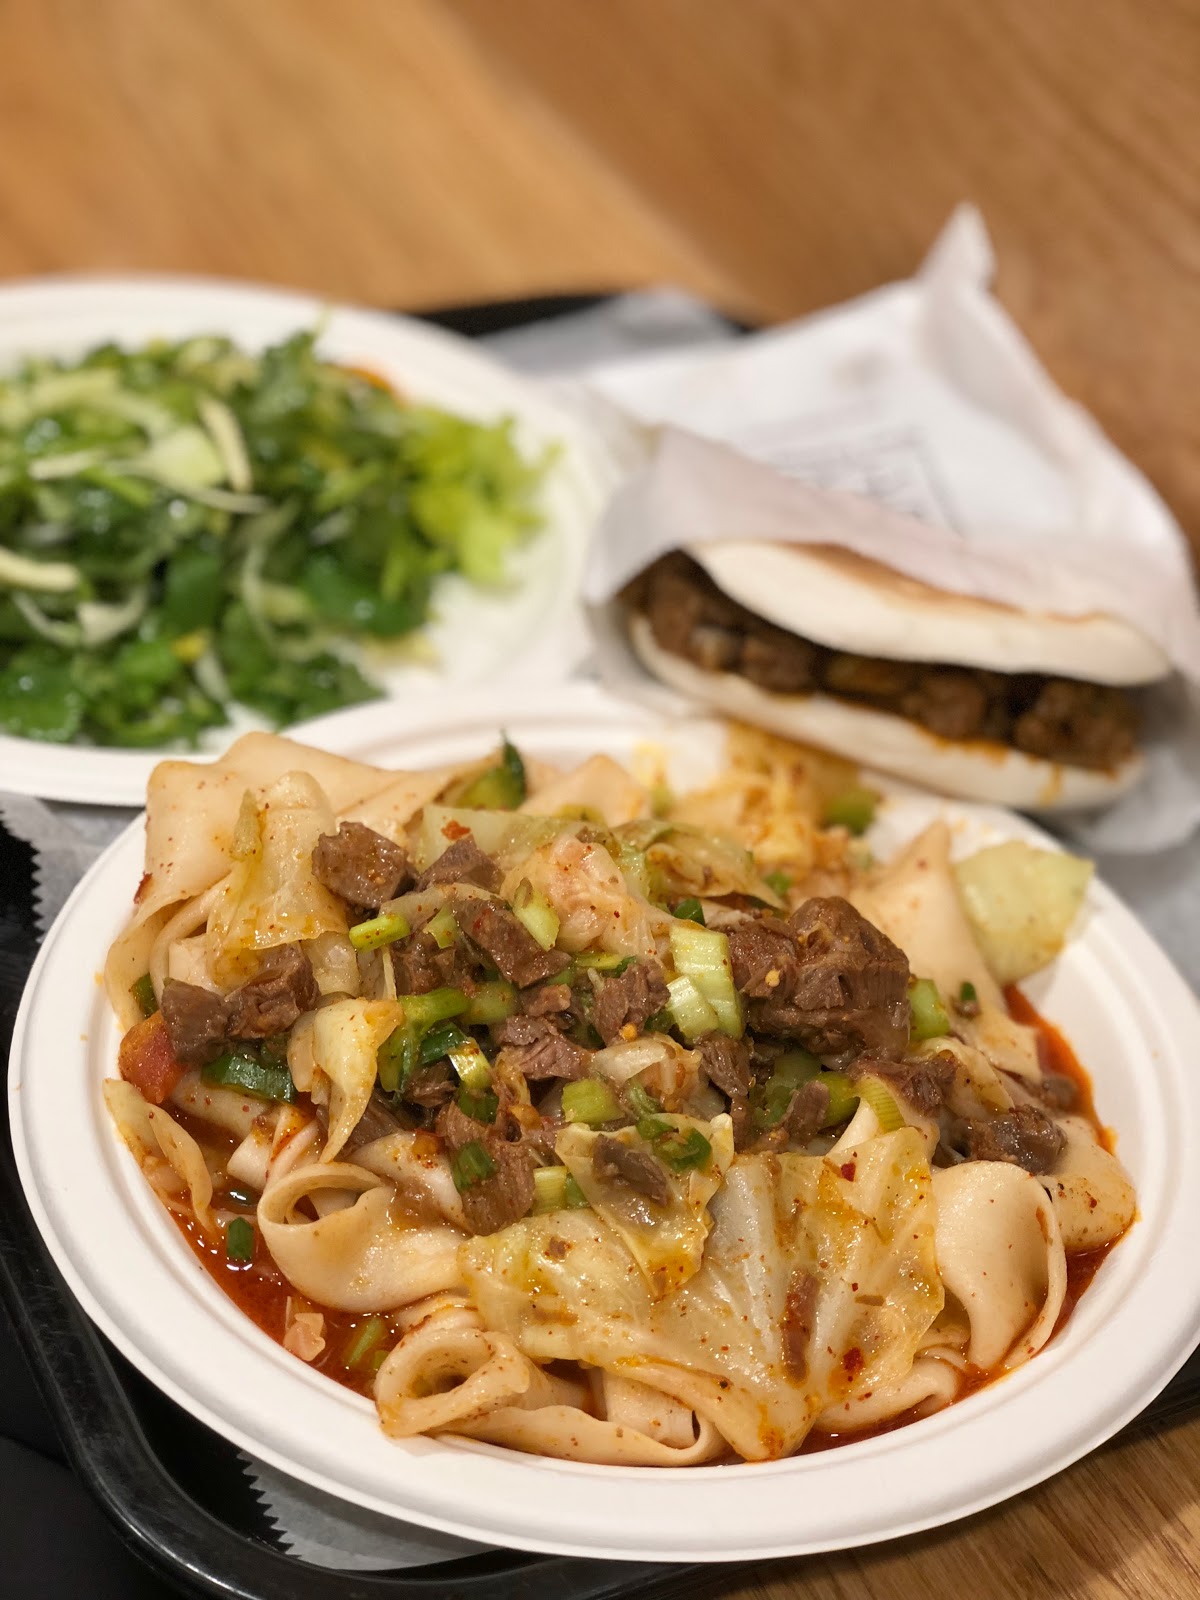 Xi'an Famous Foods, NYC, Spring 2018 